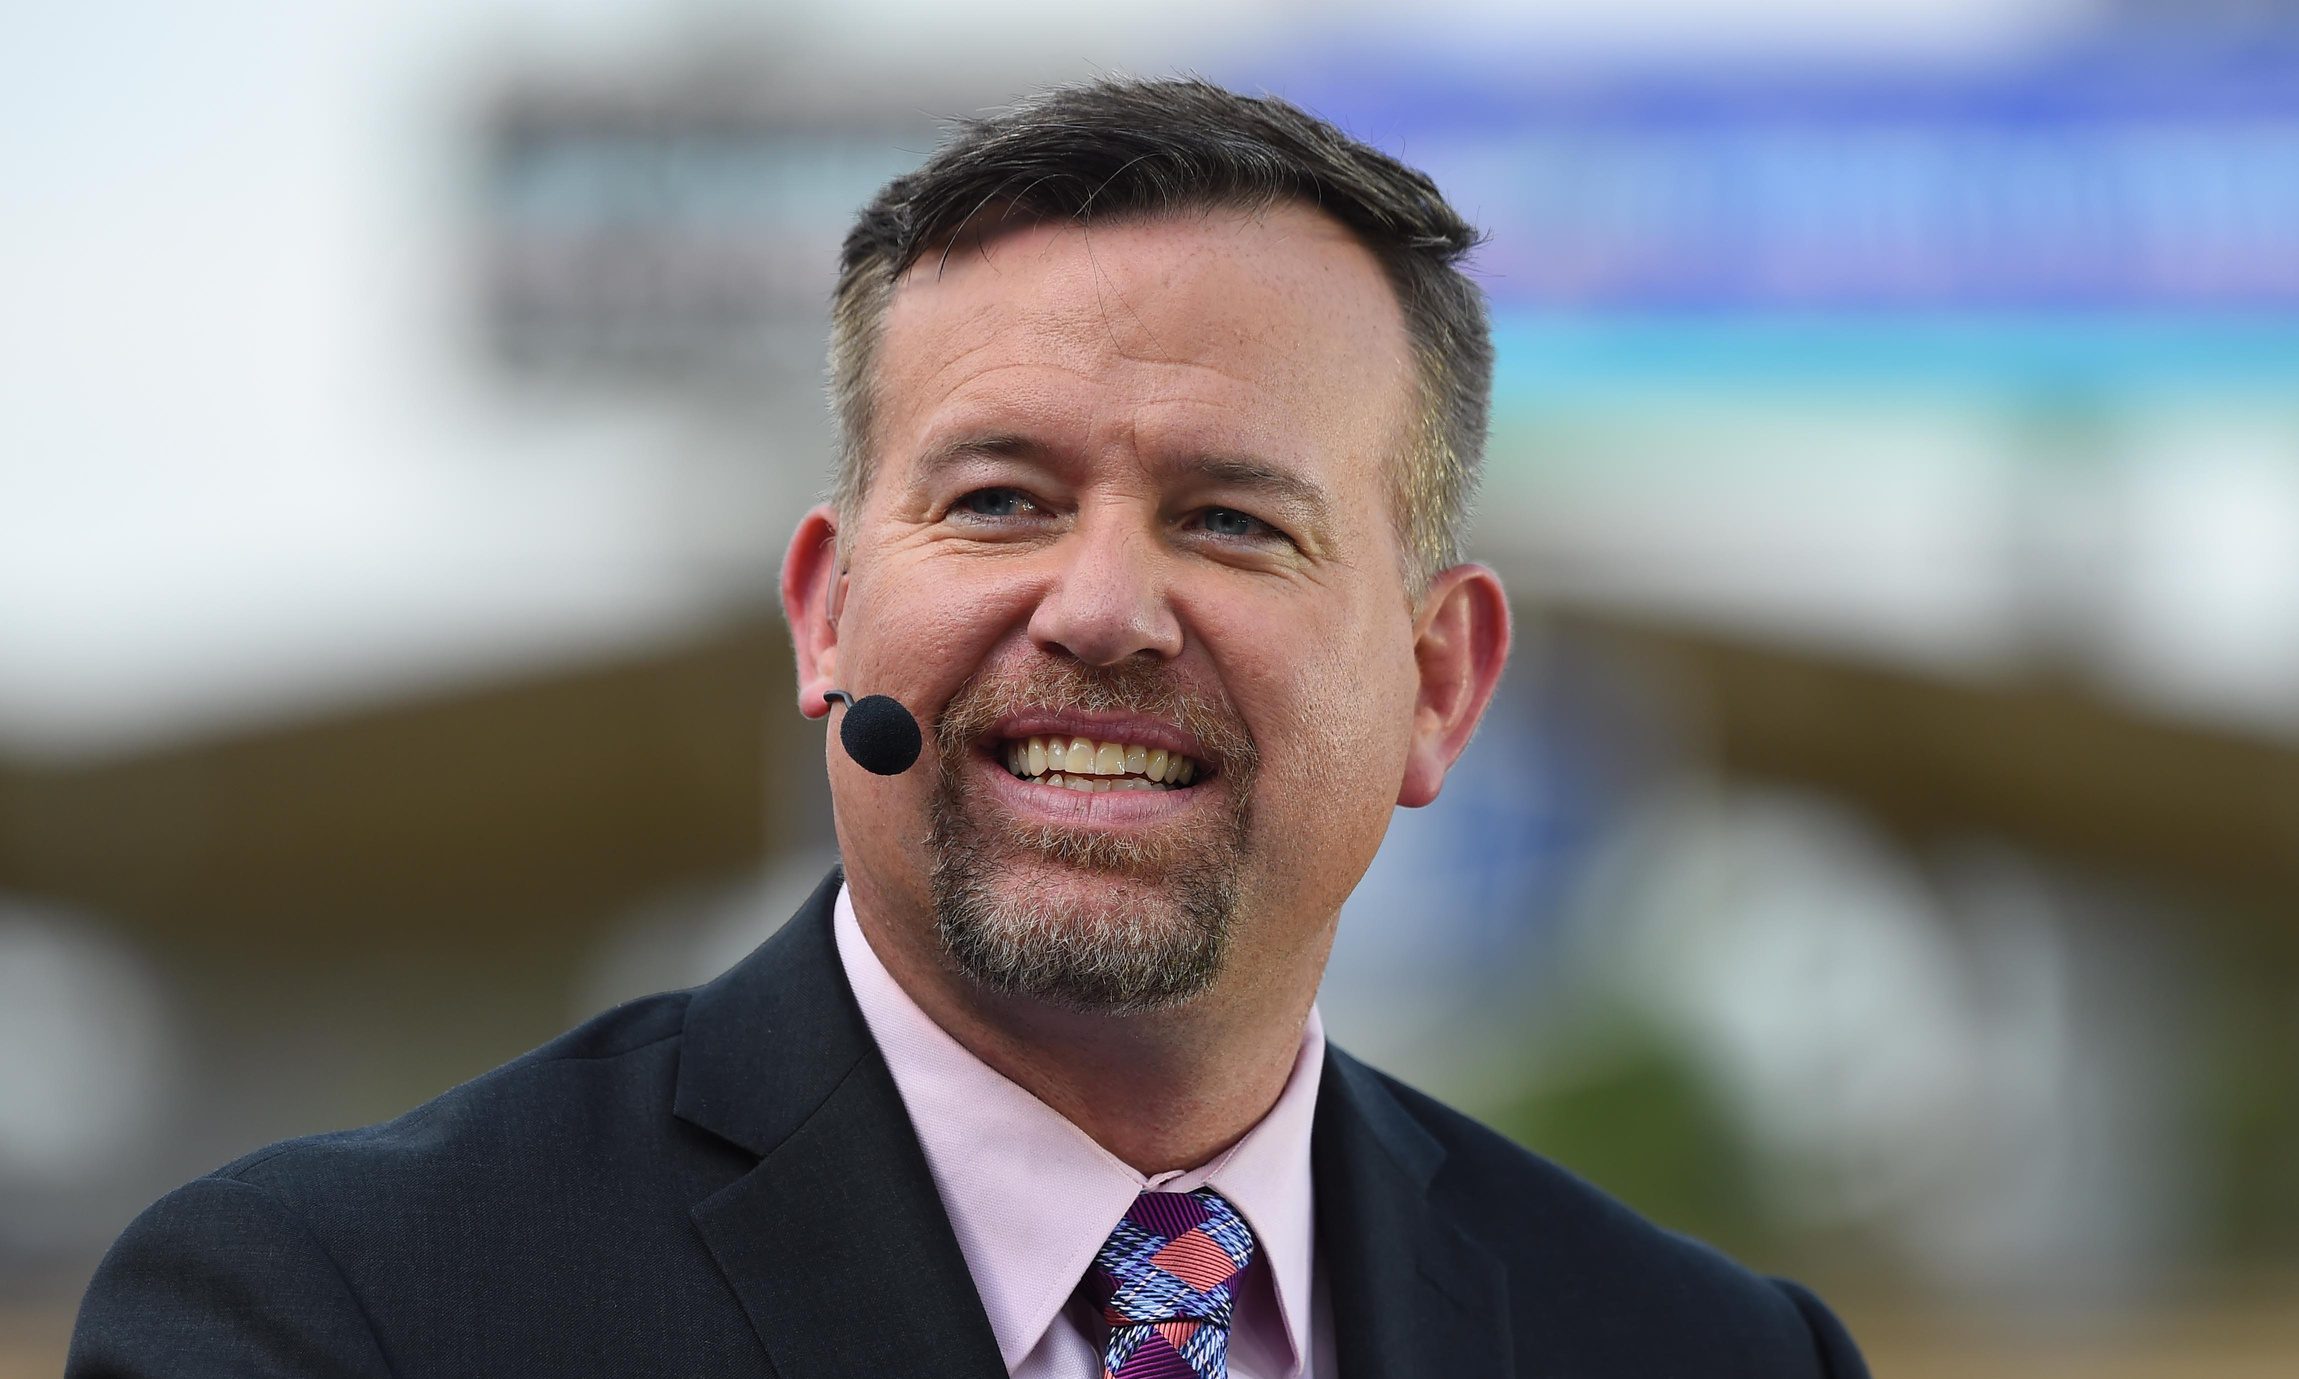 MLB Network analyst and former MLB player Sean Casey